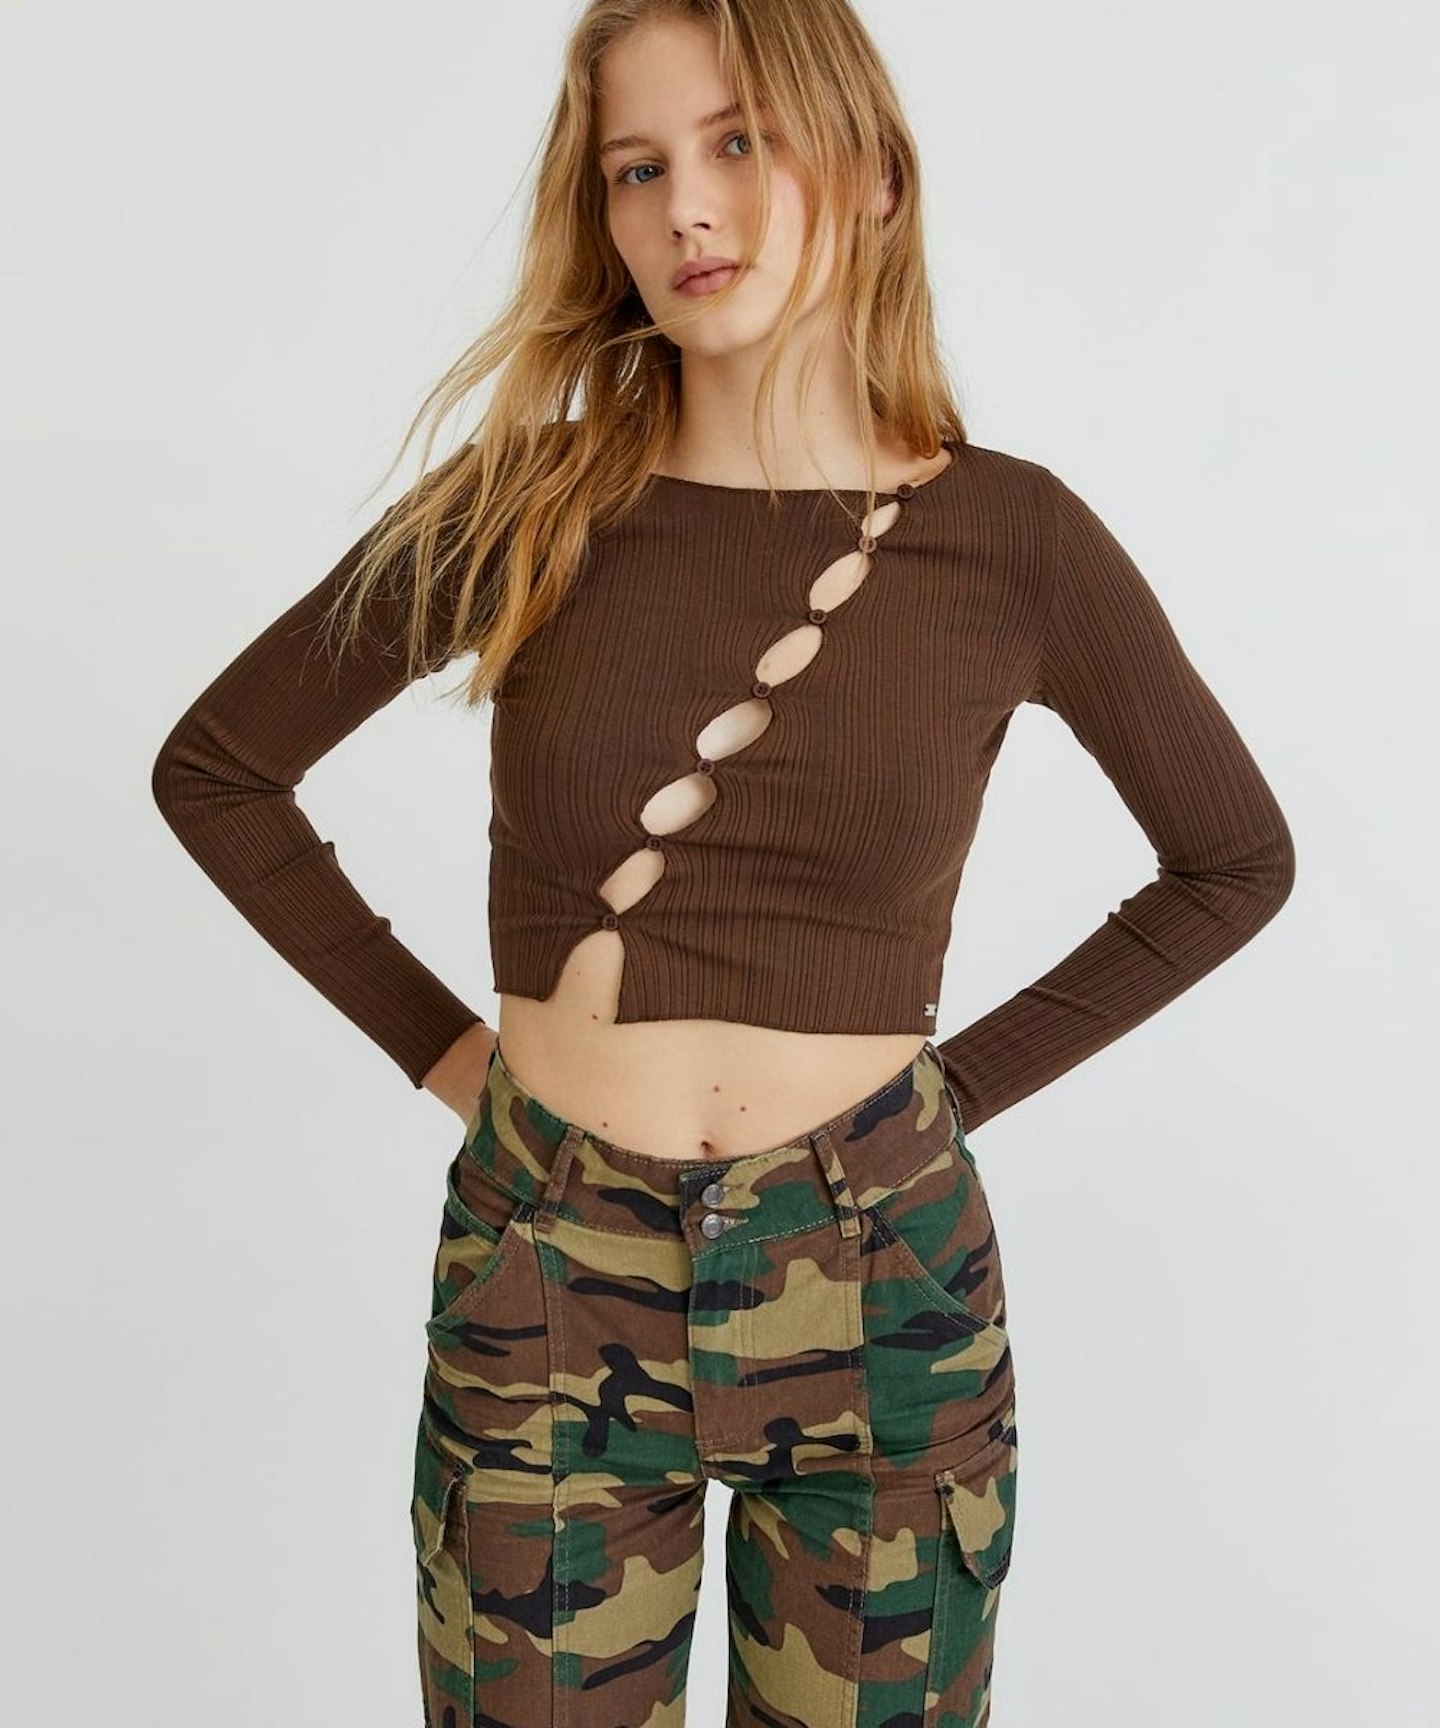 Ribbed Cut-Out Crop Top